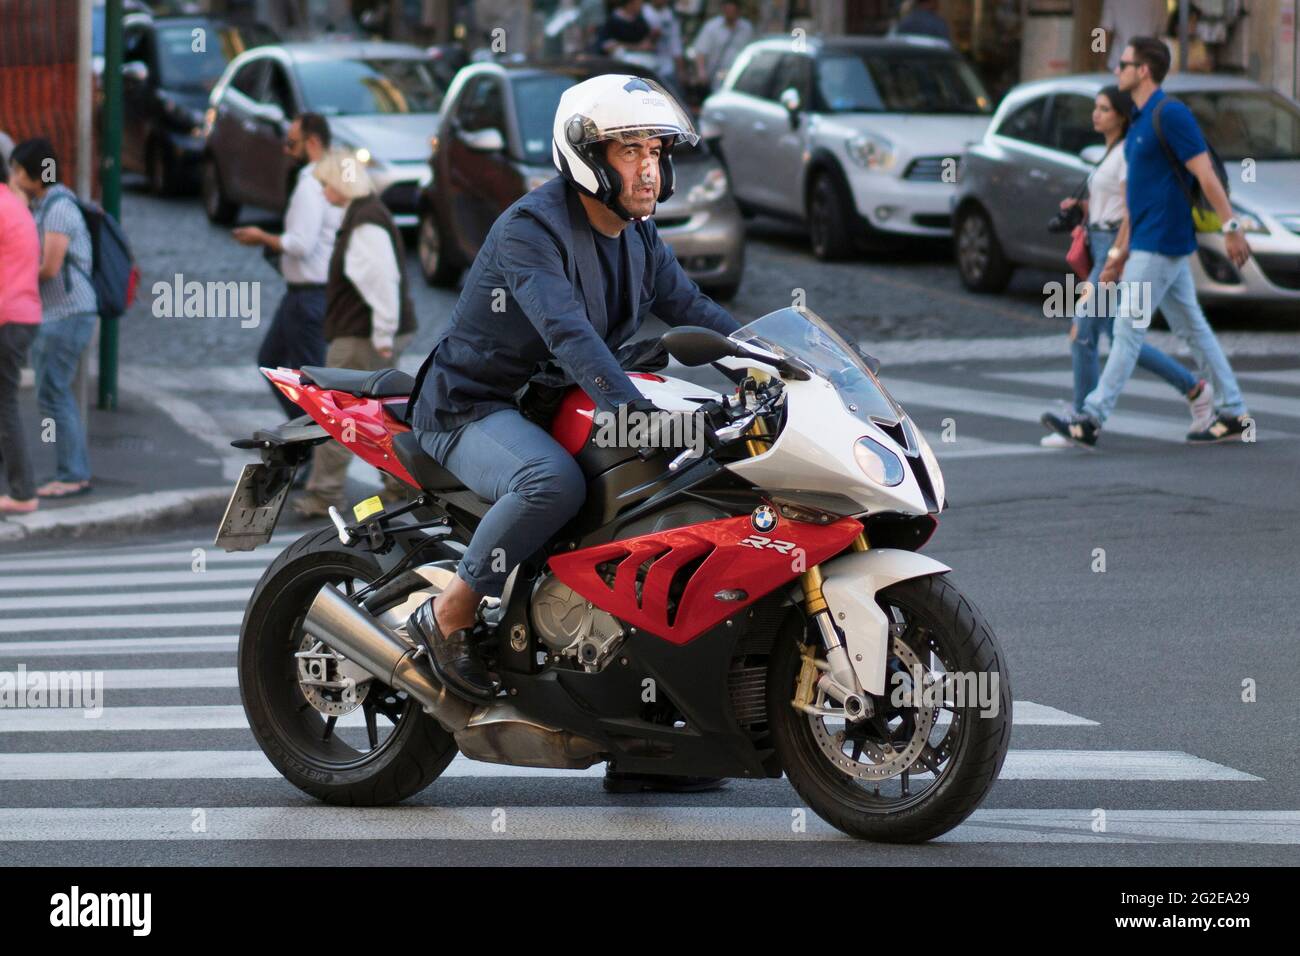 Motorcyclist in Rome Stock Photo